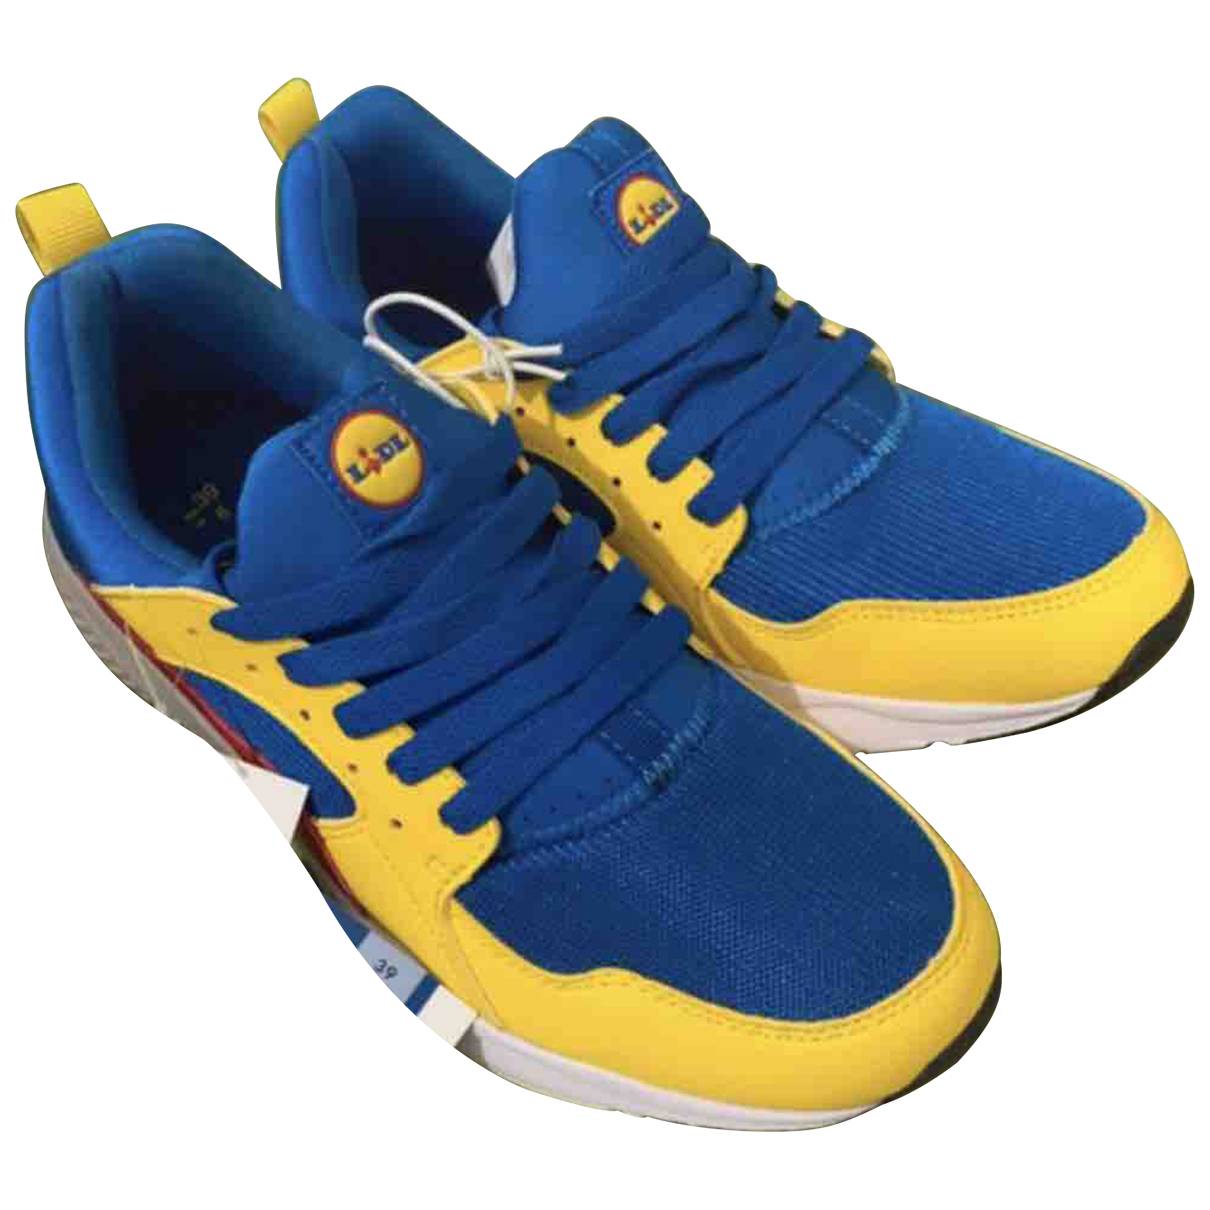 Trainers Lidl Blue size 39 EU in Rubber - 16094915